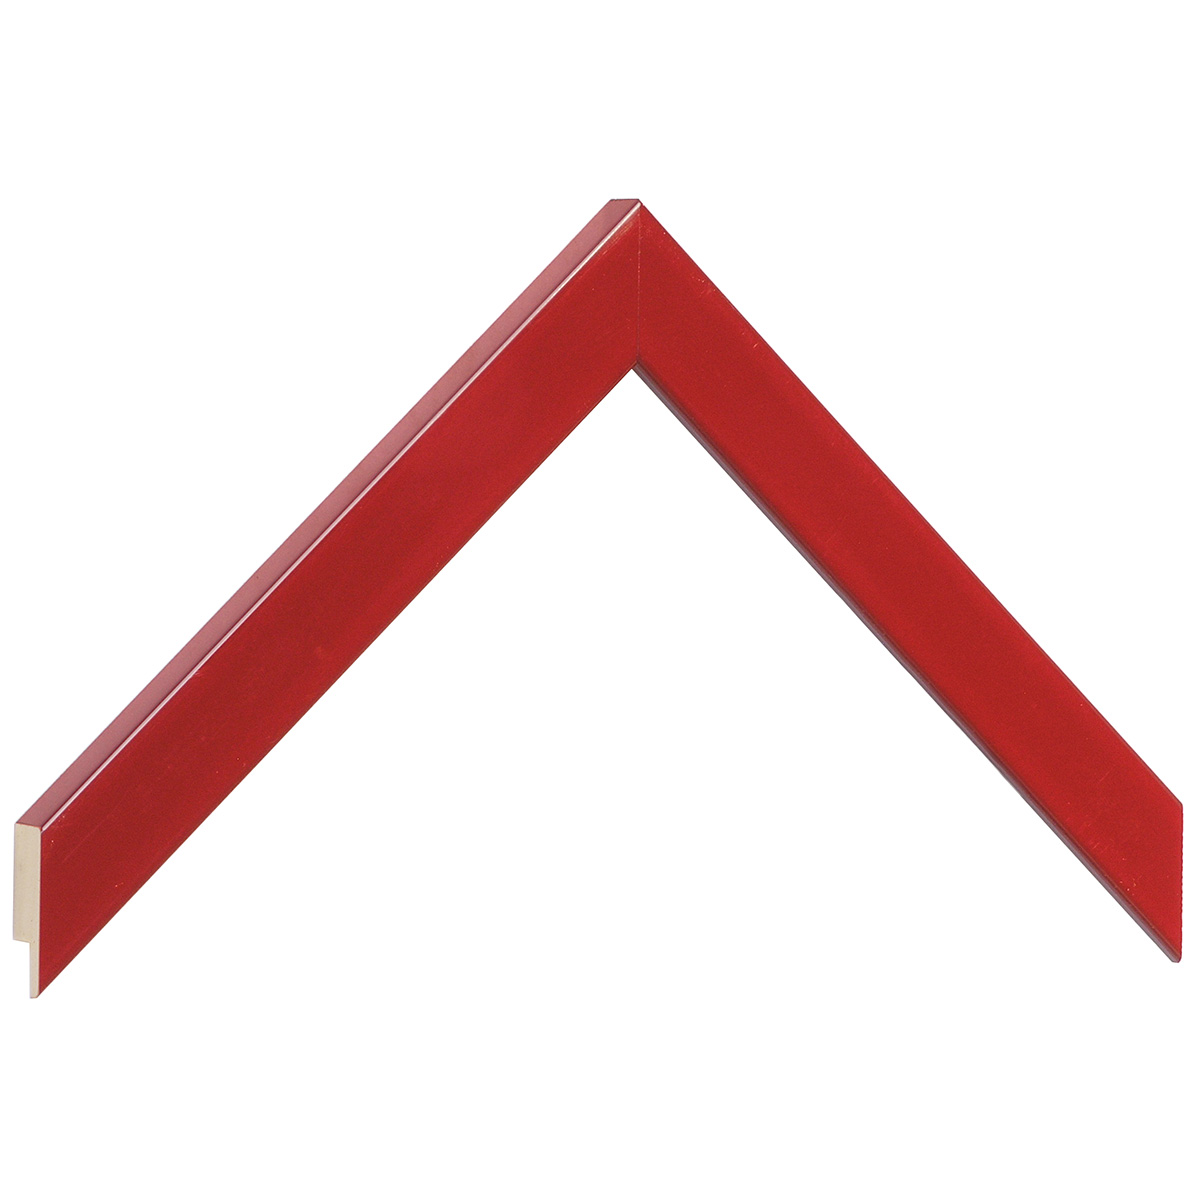 Moulding ayous - width 20mm height 14 - Glossy red - Sample